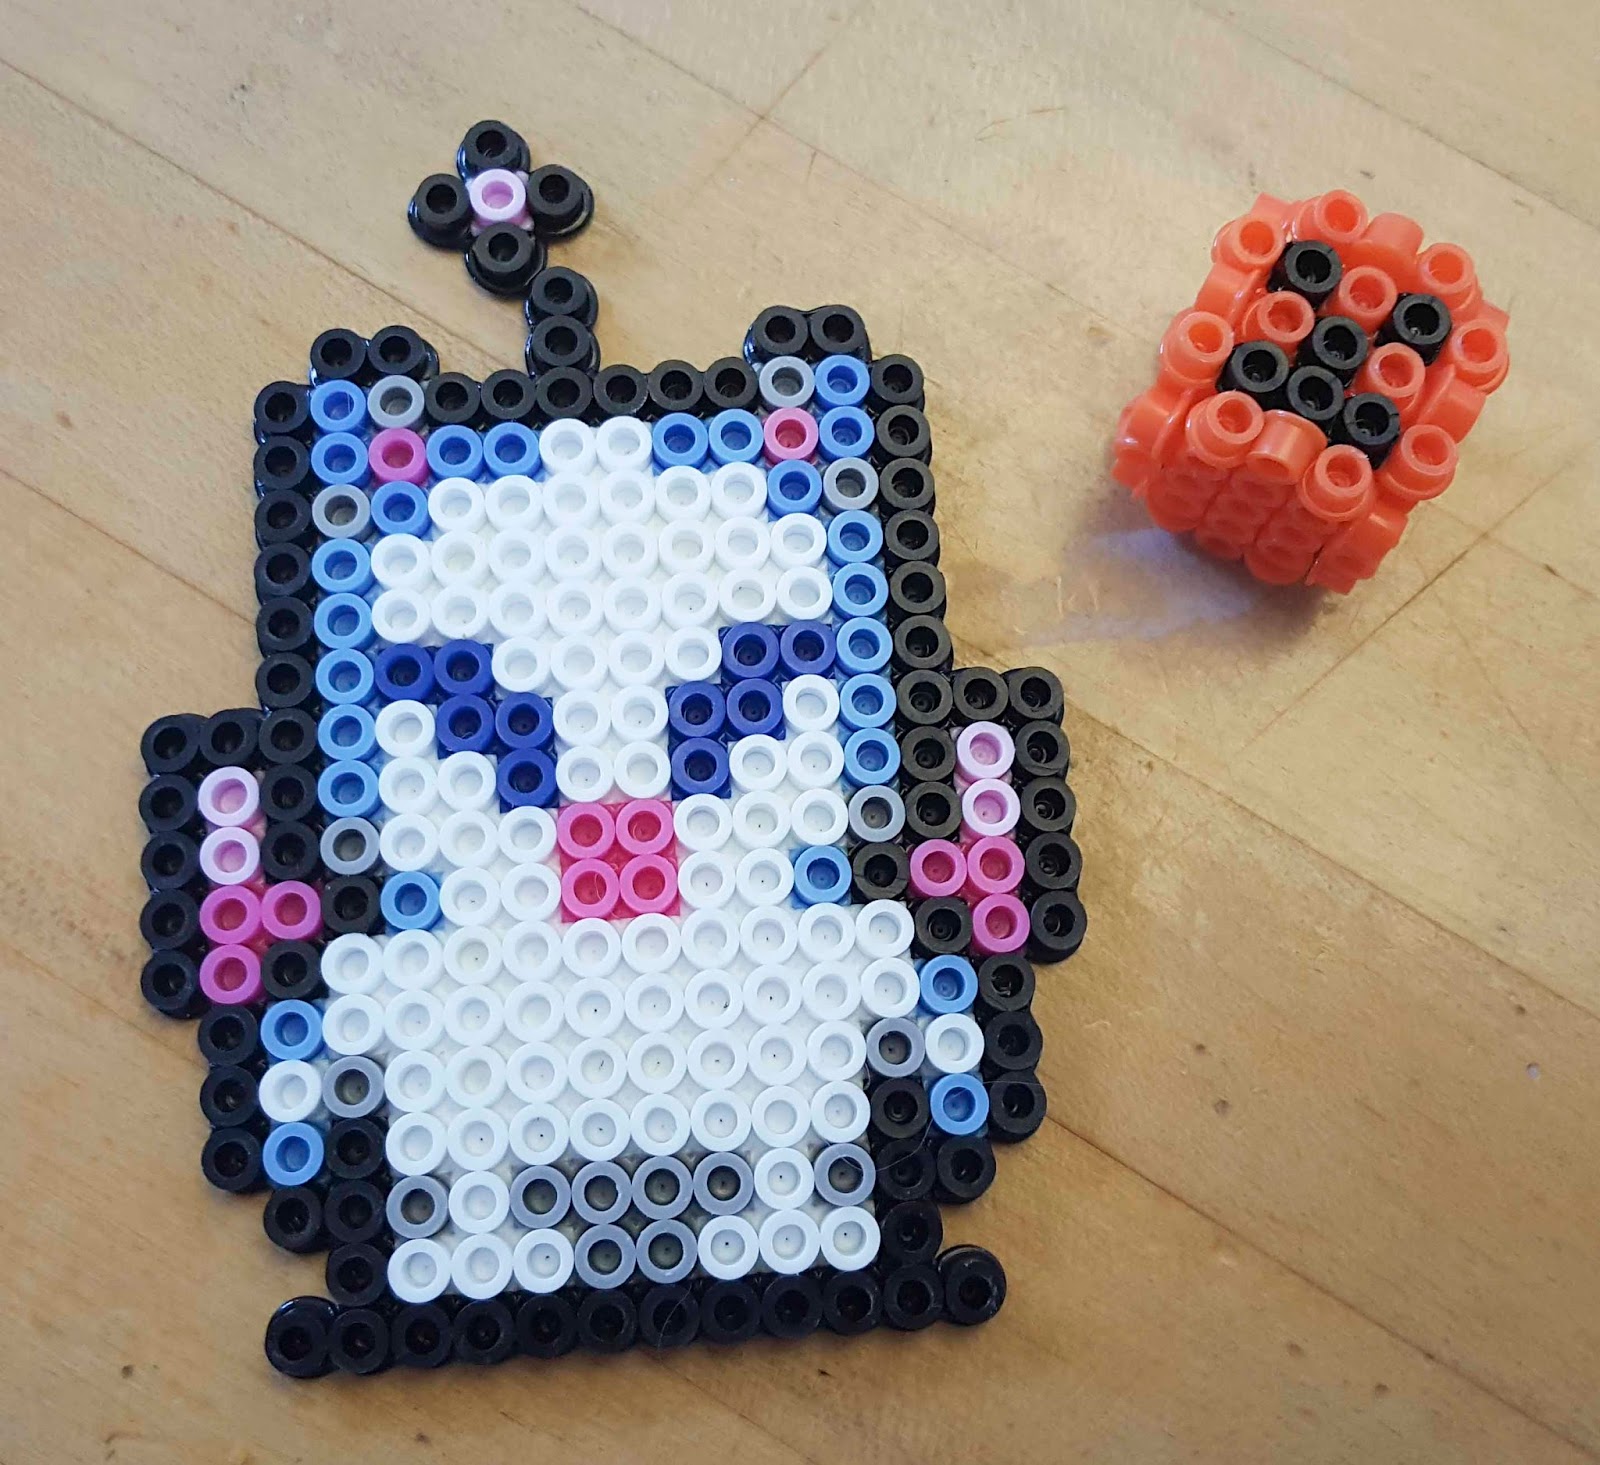 I found that the Perler beads are much thicker and slightly taller than the...